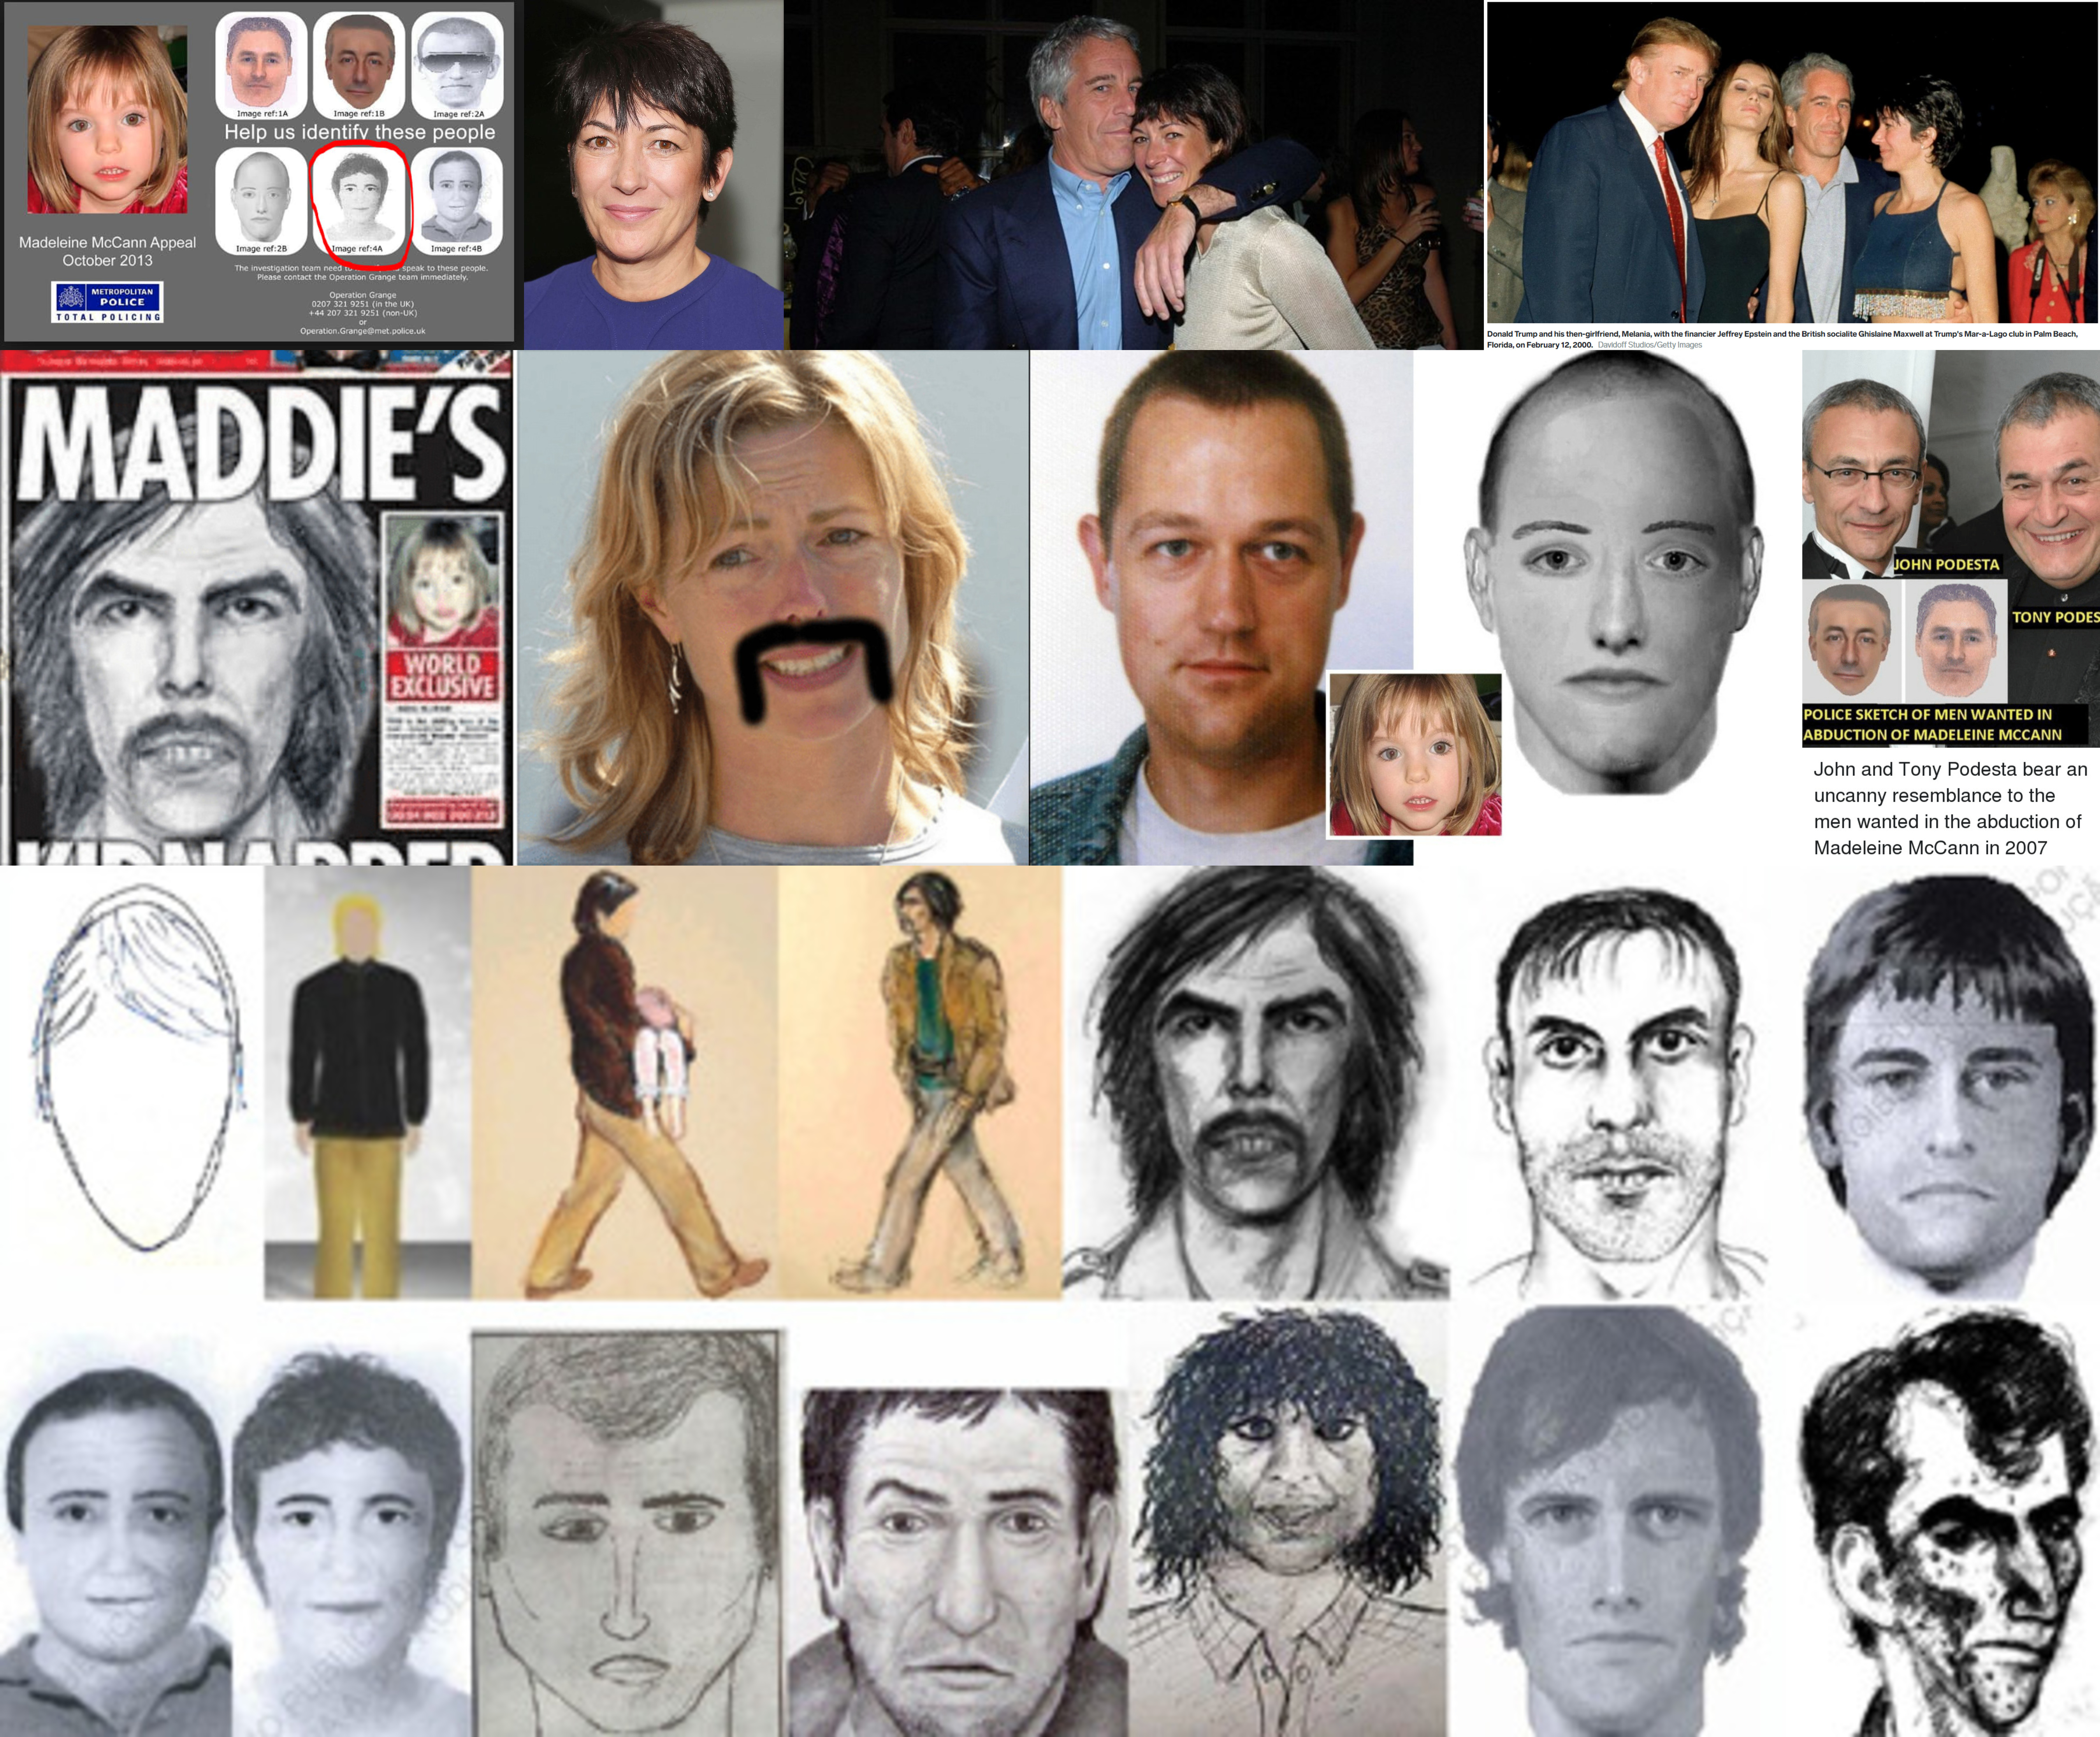 Look at these images and tell me this is not a game show. Ghislaine Maxwell's Madeleine McCann